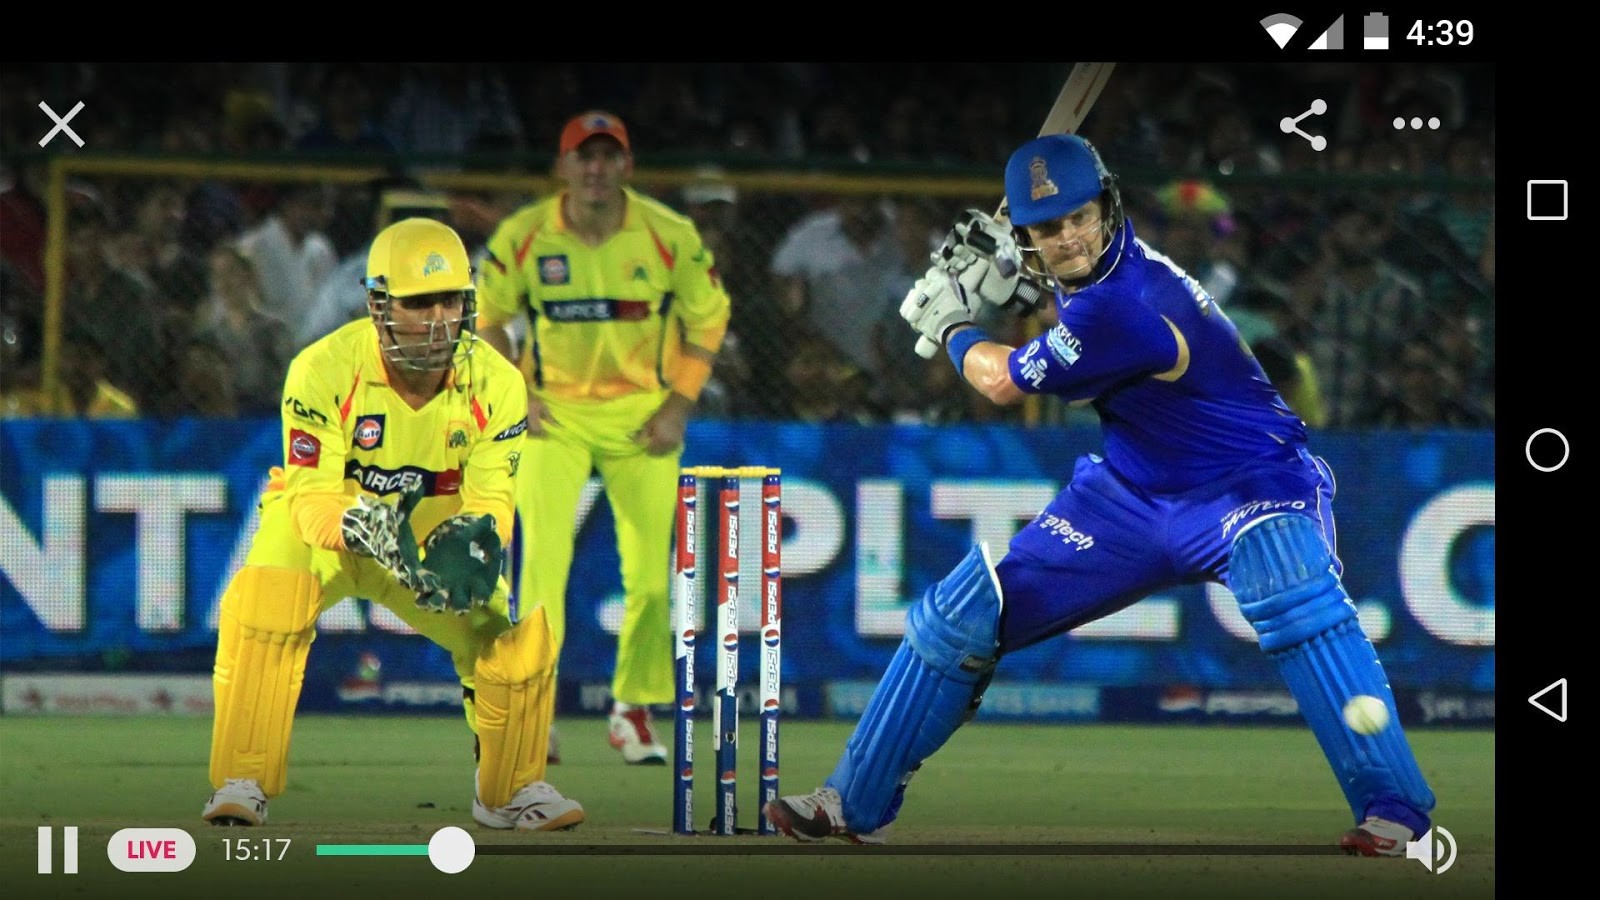 Hotstar Android App: Watch Live Cricket Match Online - Show Box1600 x 900